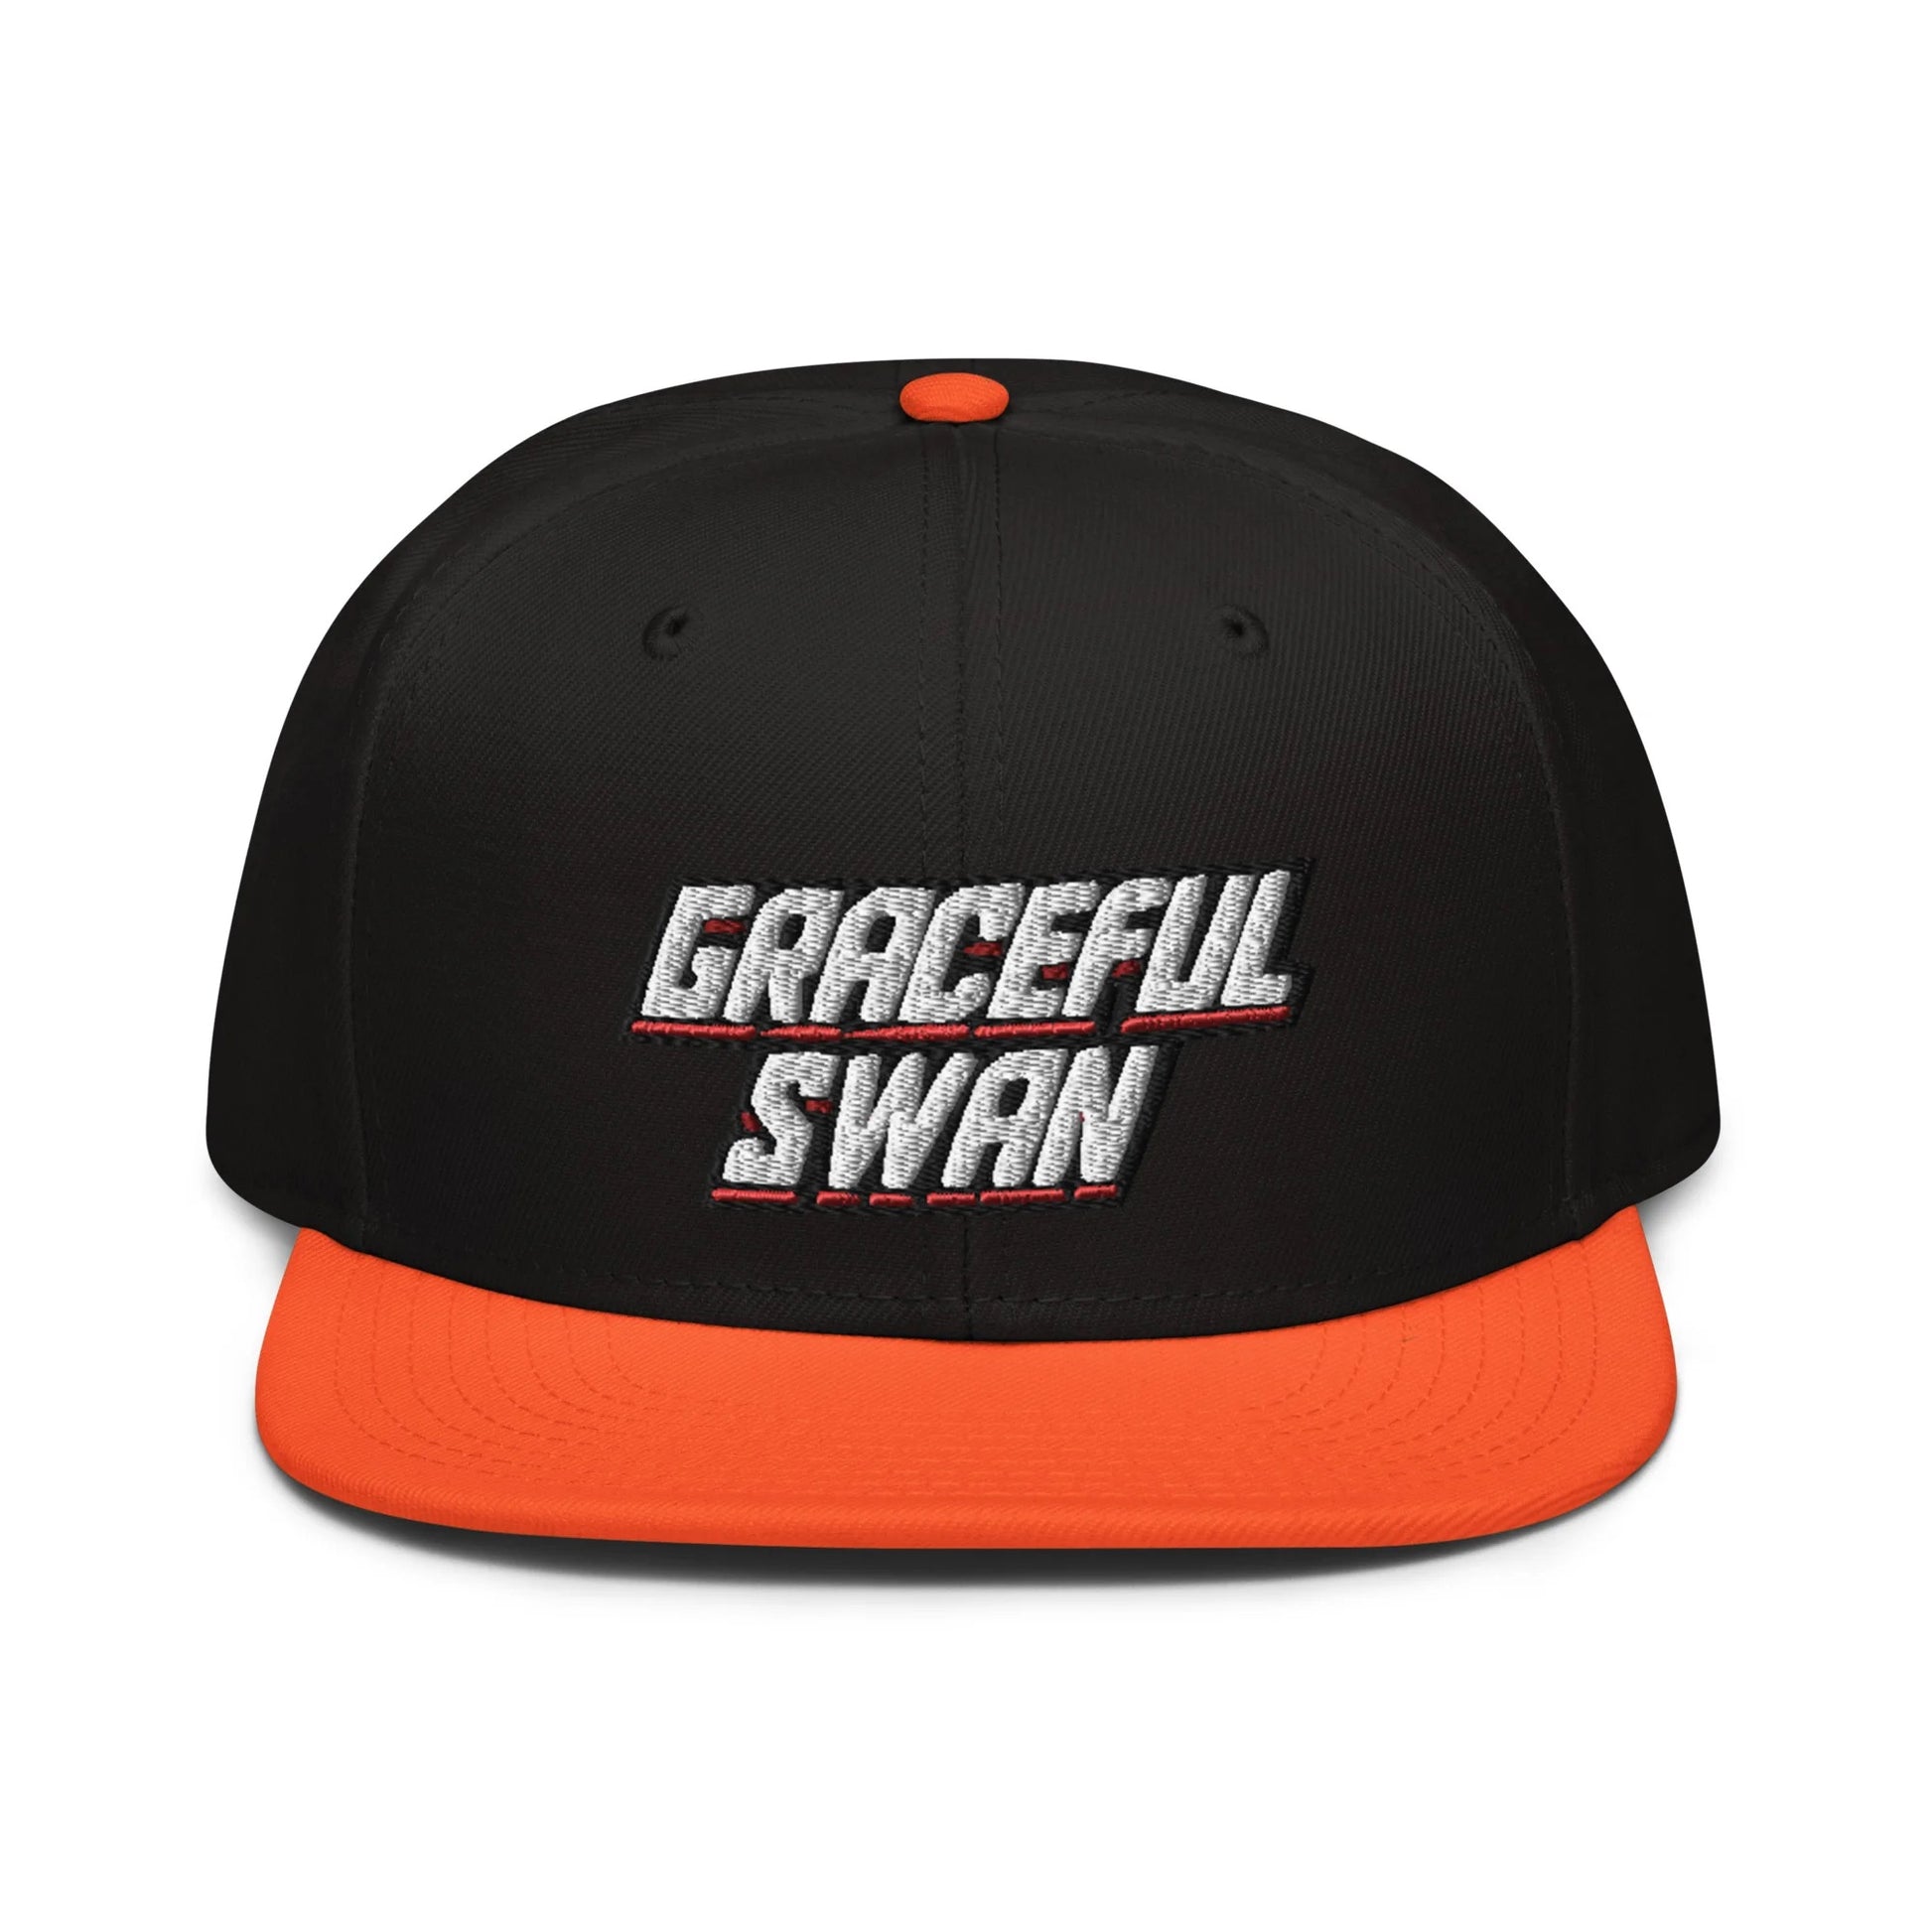 Graceful Swan ShowZone hat in black with orange brim and accents